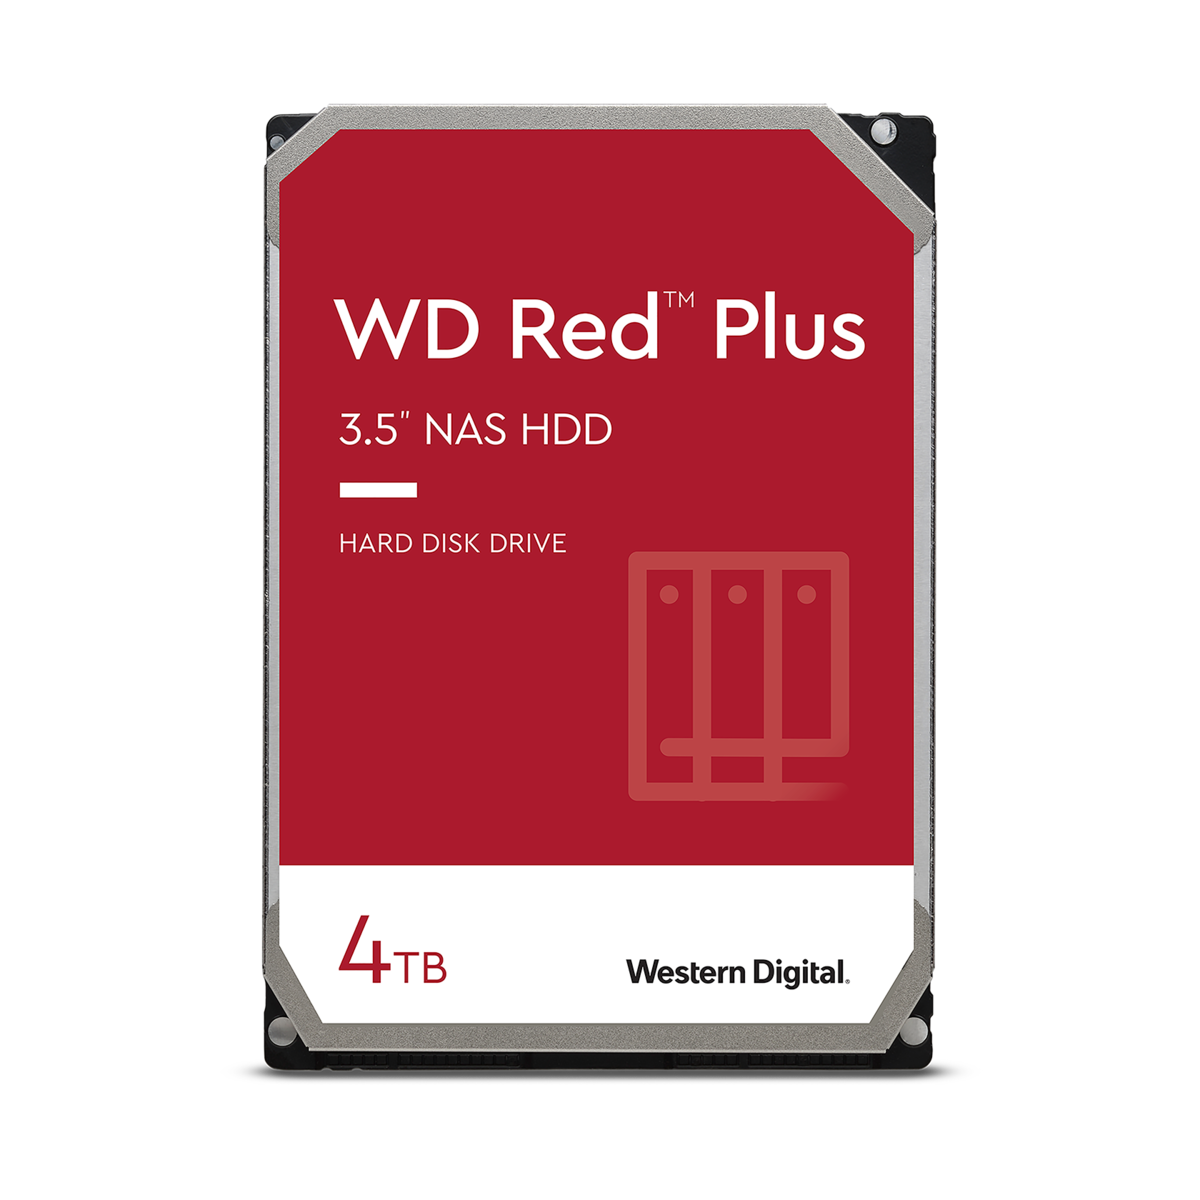 4TB WD Red Plus NAS 5400 RPM 3.5" Internal Hard Drive $89 with $8 off code + FS $89.99